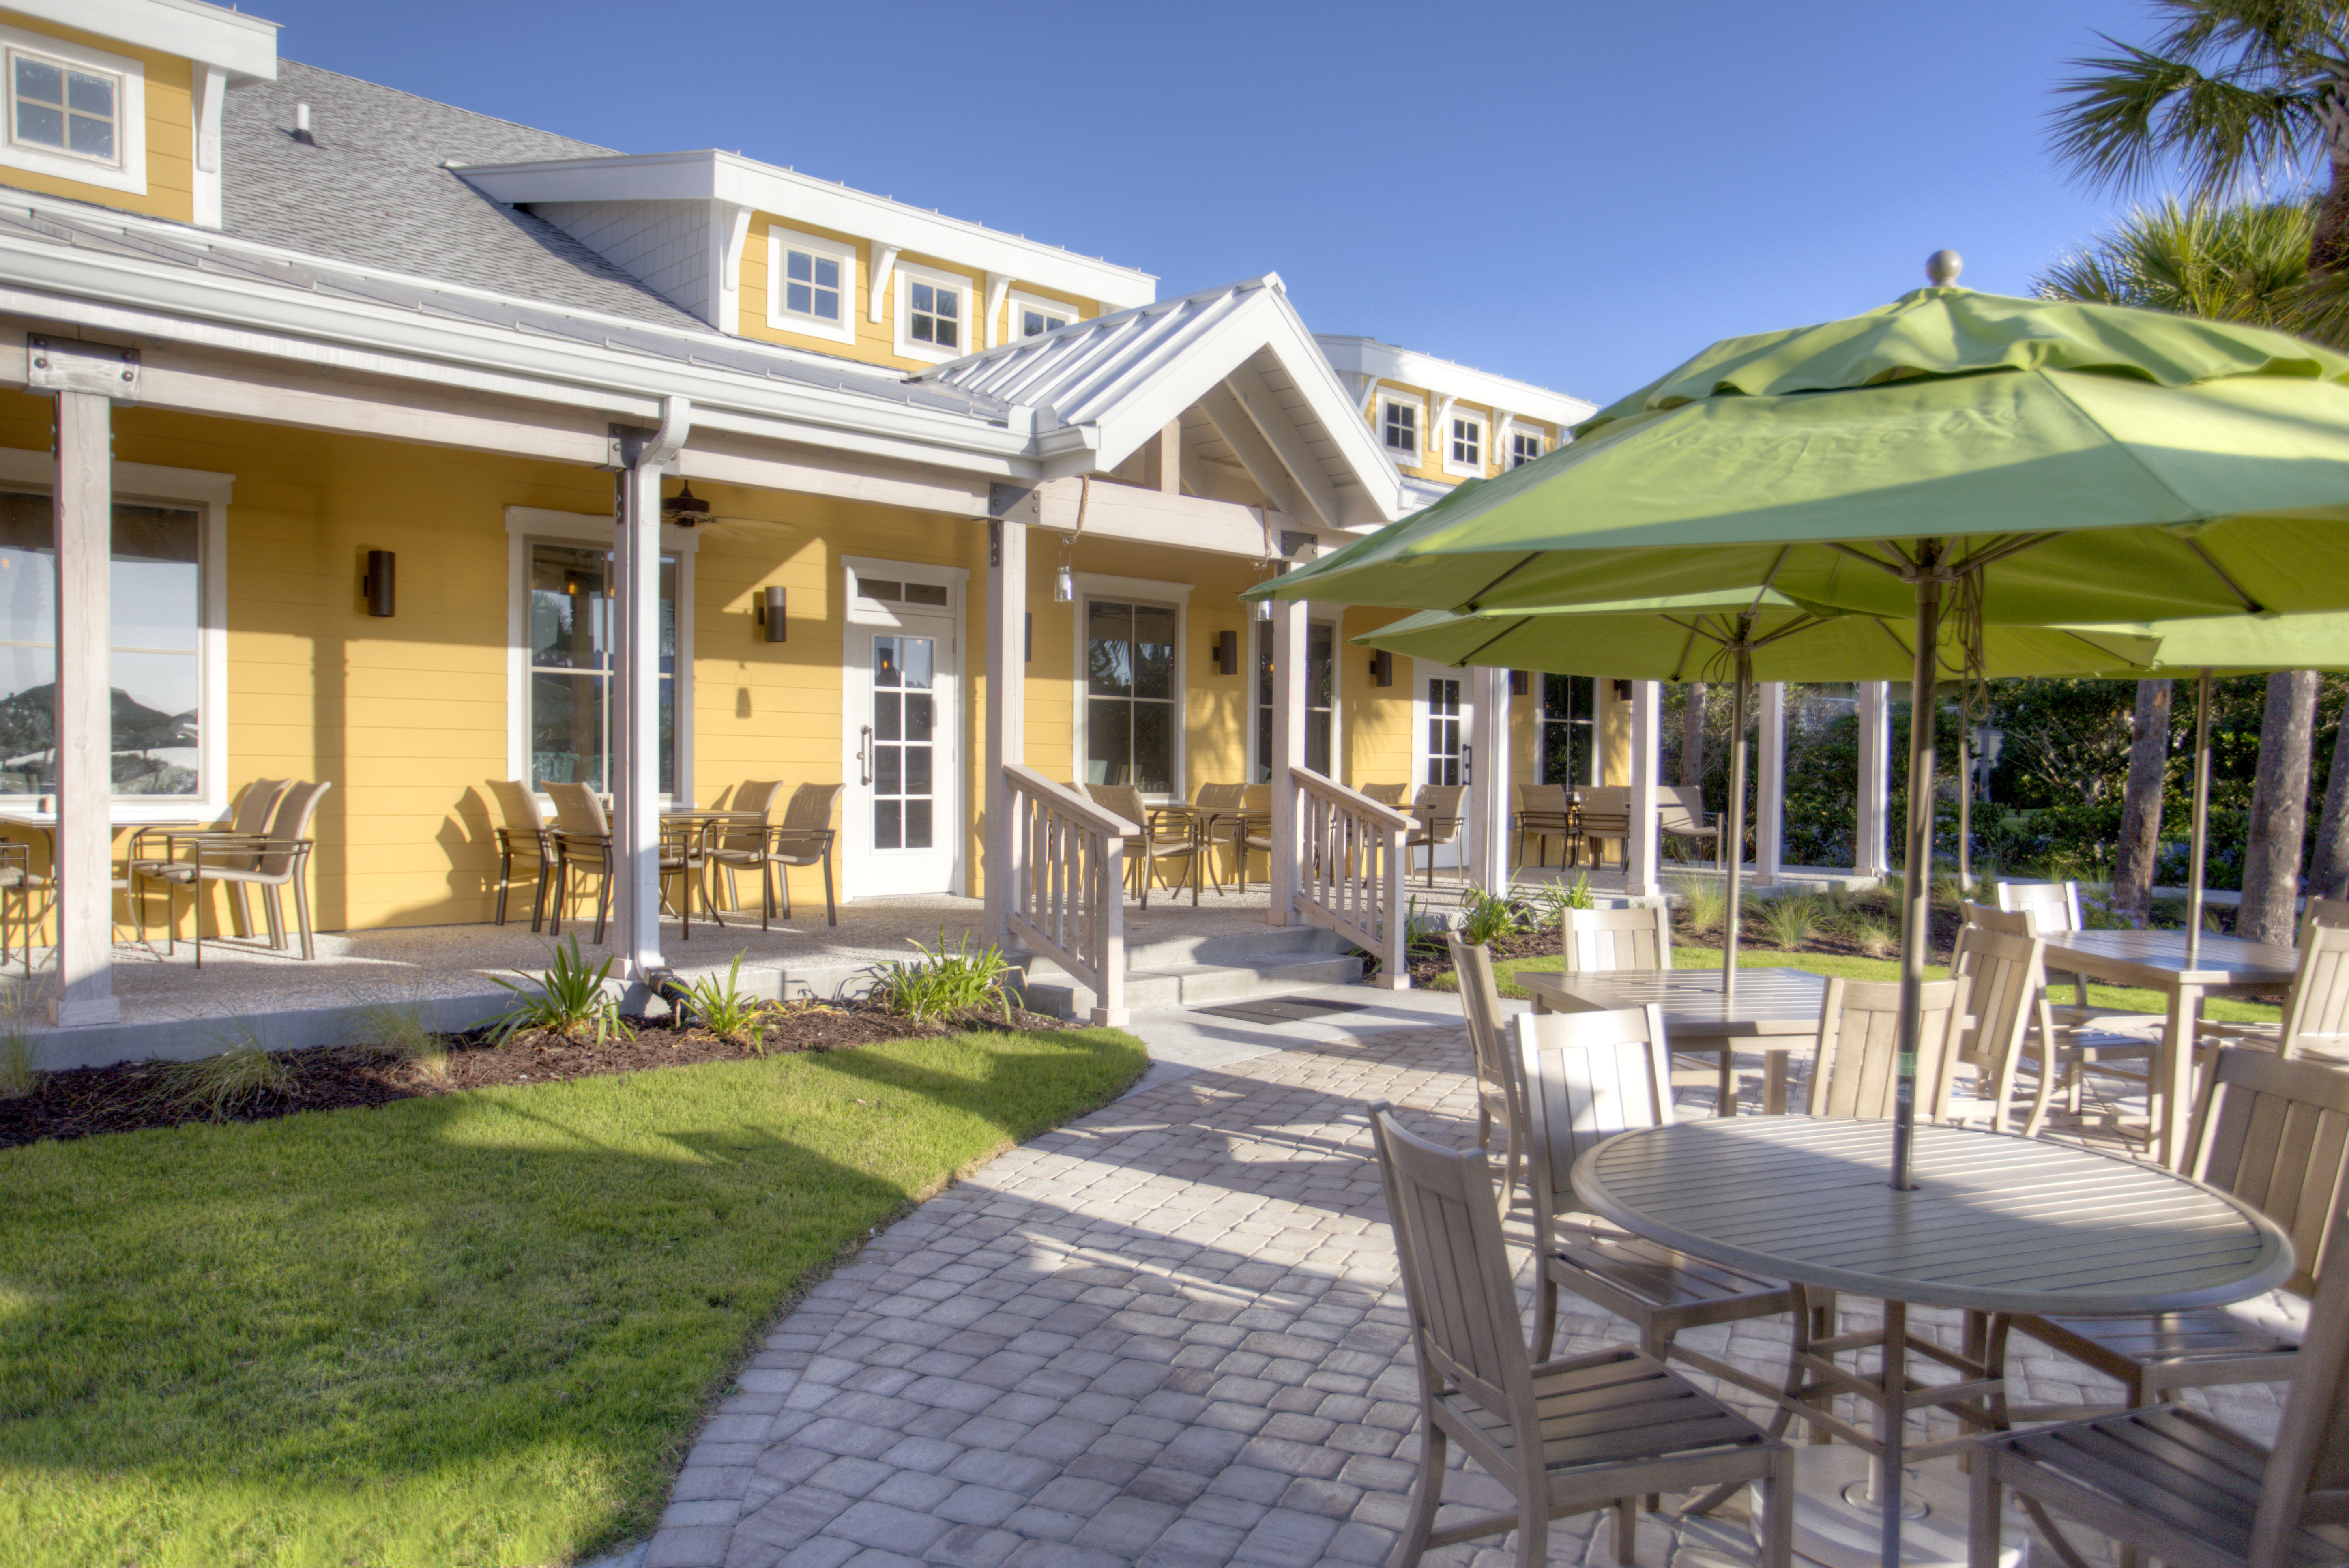 Choose the porch or the patio for outdoor dining at Beach House